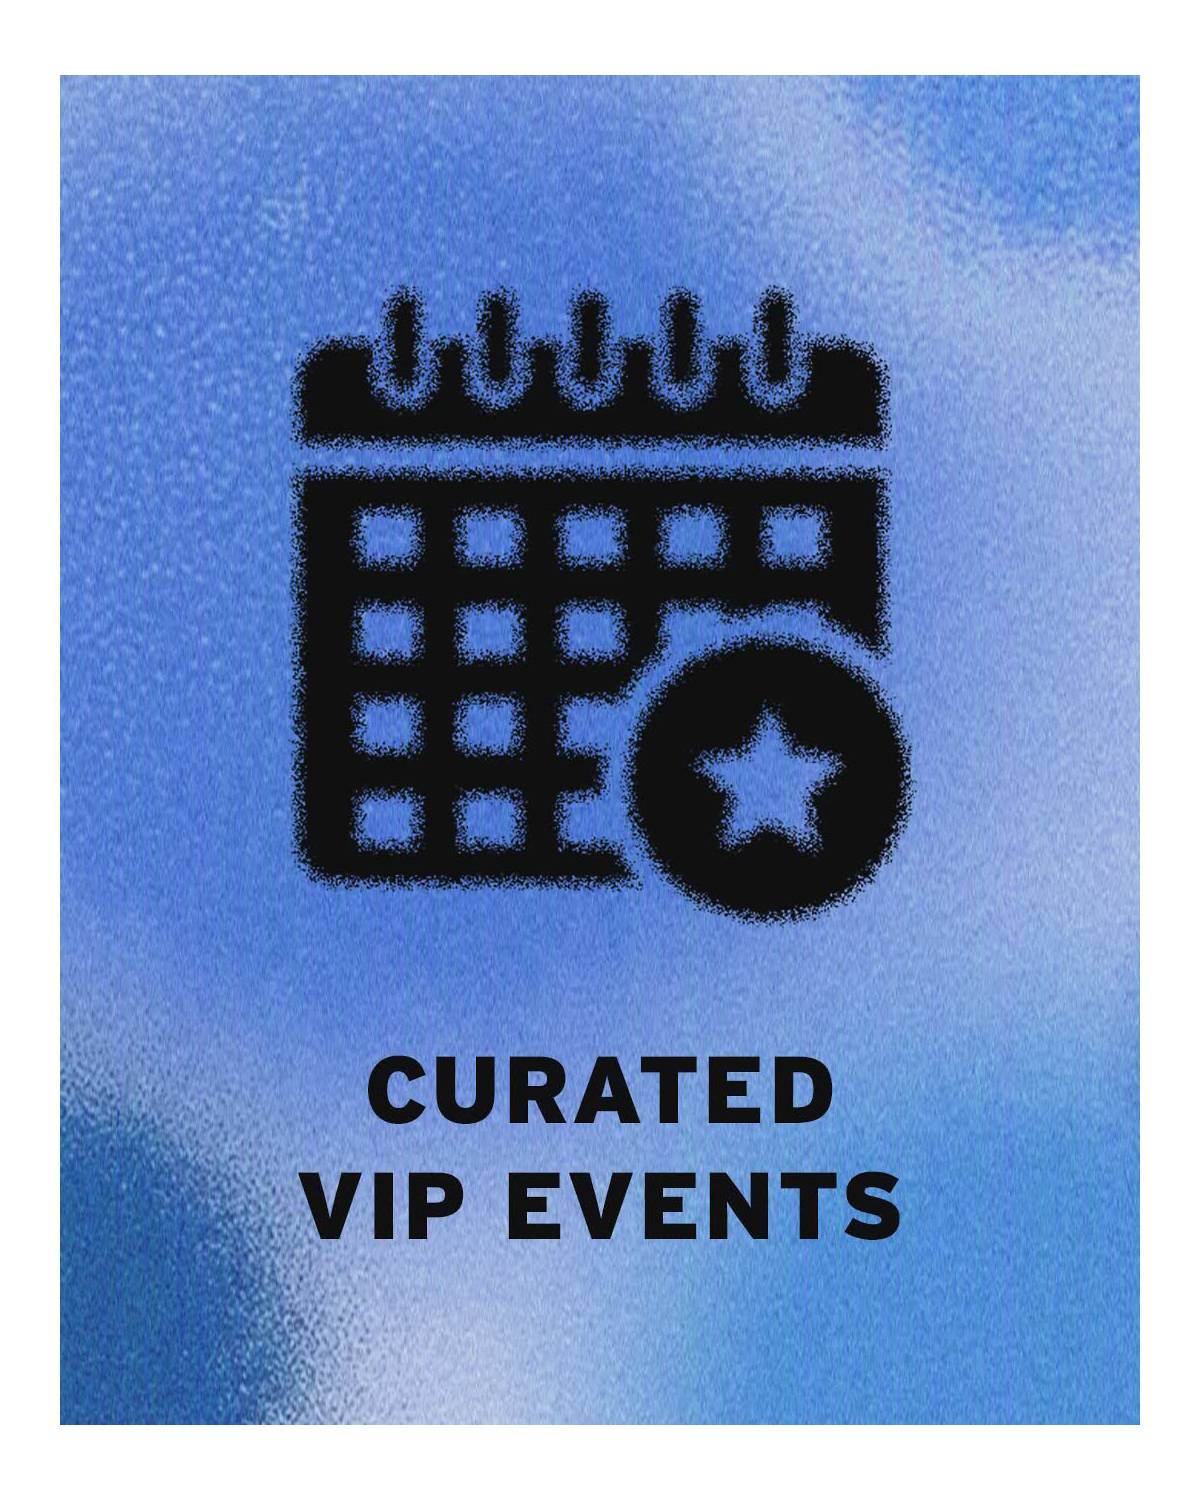 Icon of a calendar and the words "Curated VIP Events" overlayed on a blue background.